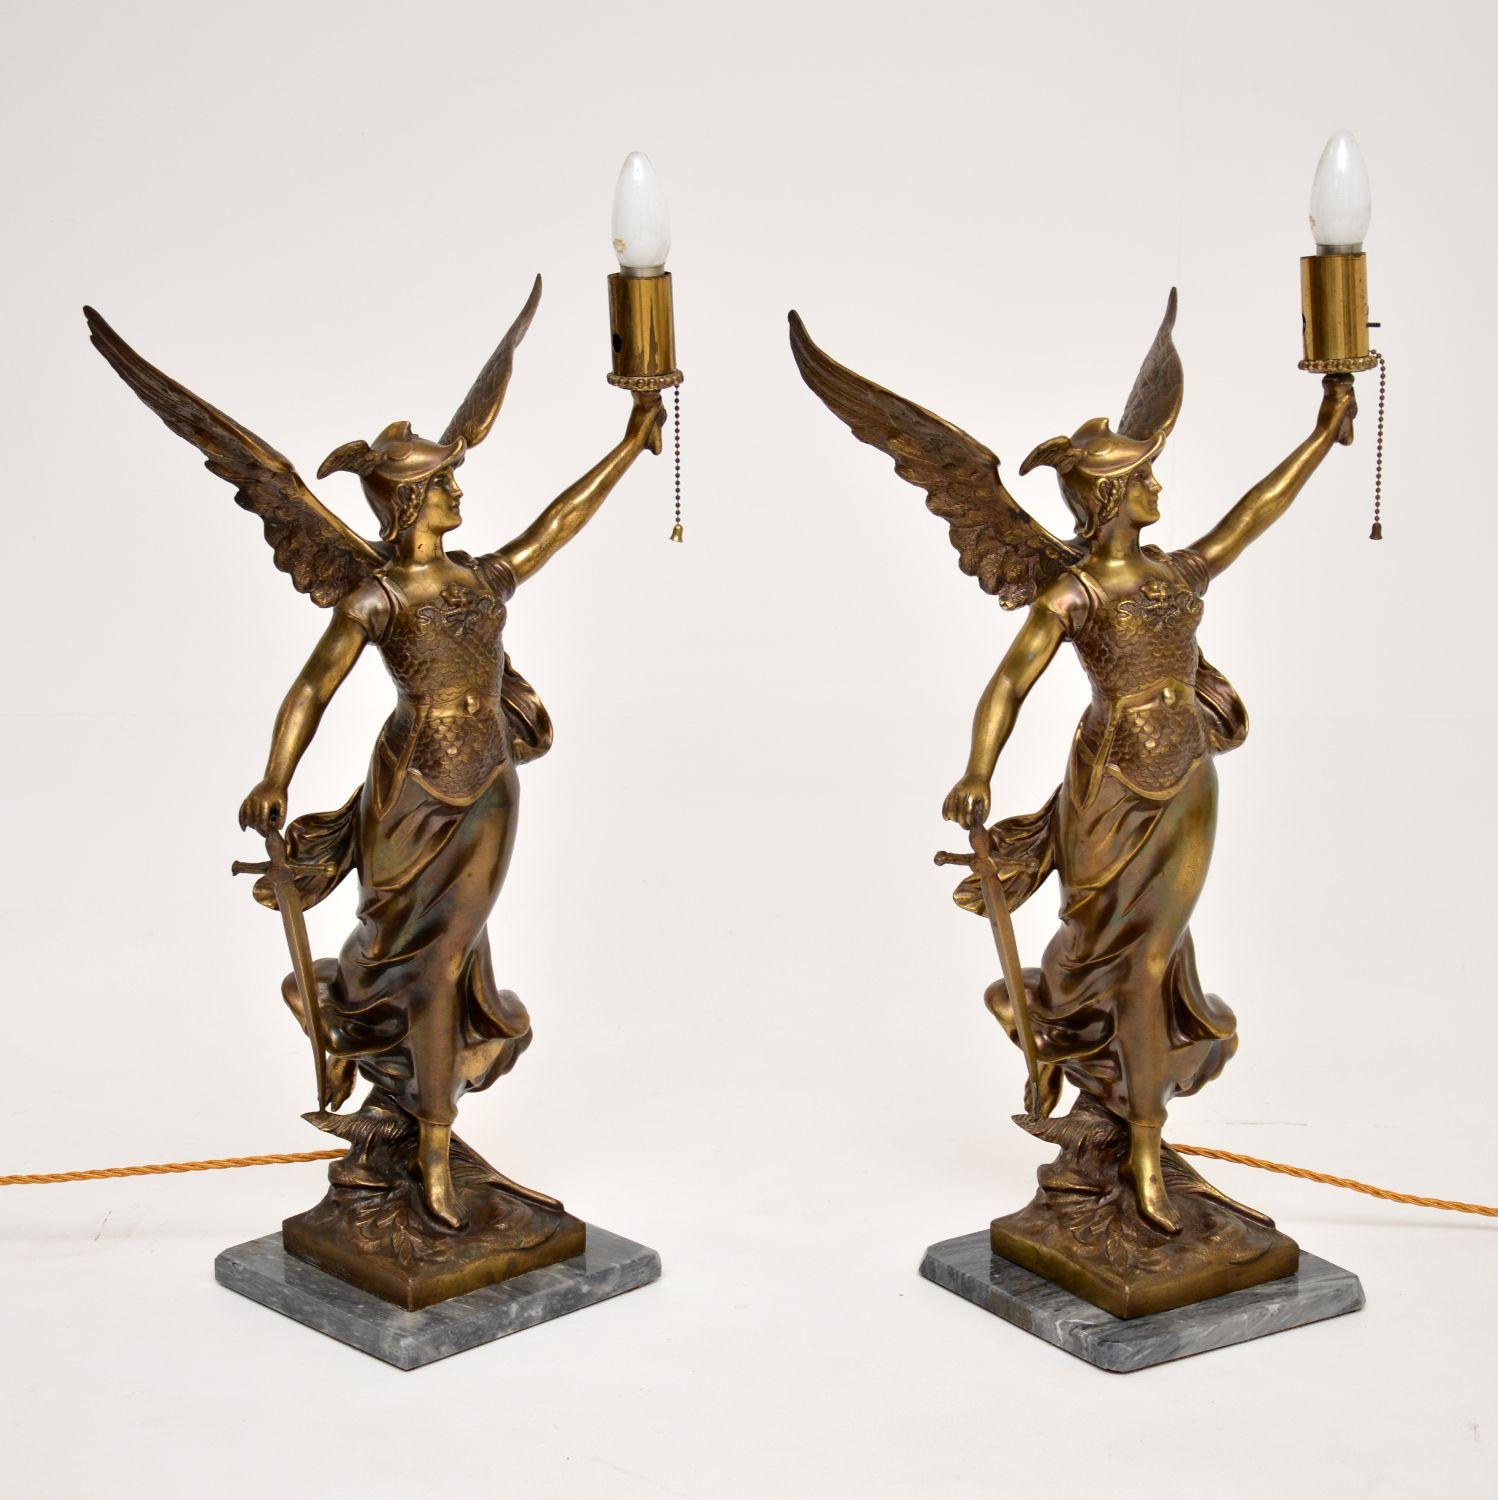 A monumental pair of bronze table lamps on marble bases, depicting the ancient Greek goddess Athena. These were made in England and date from around the 1920’s.

They are very large and extremely impressive, the quality is fantastic. Each lamp is